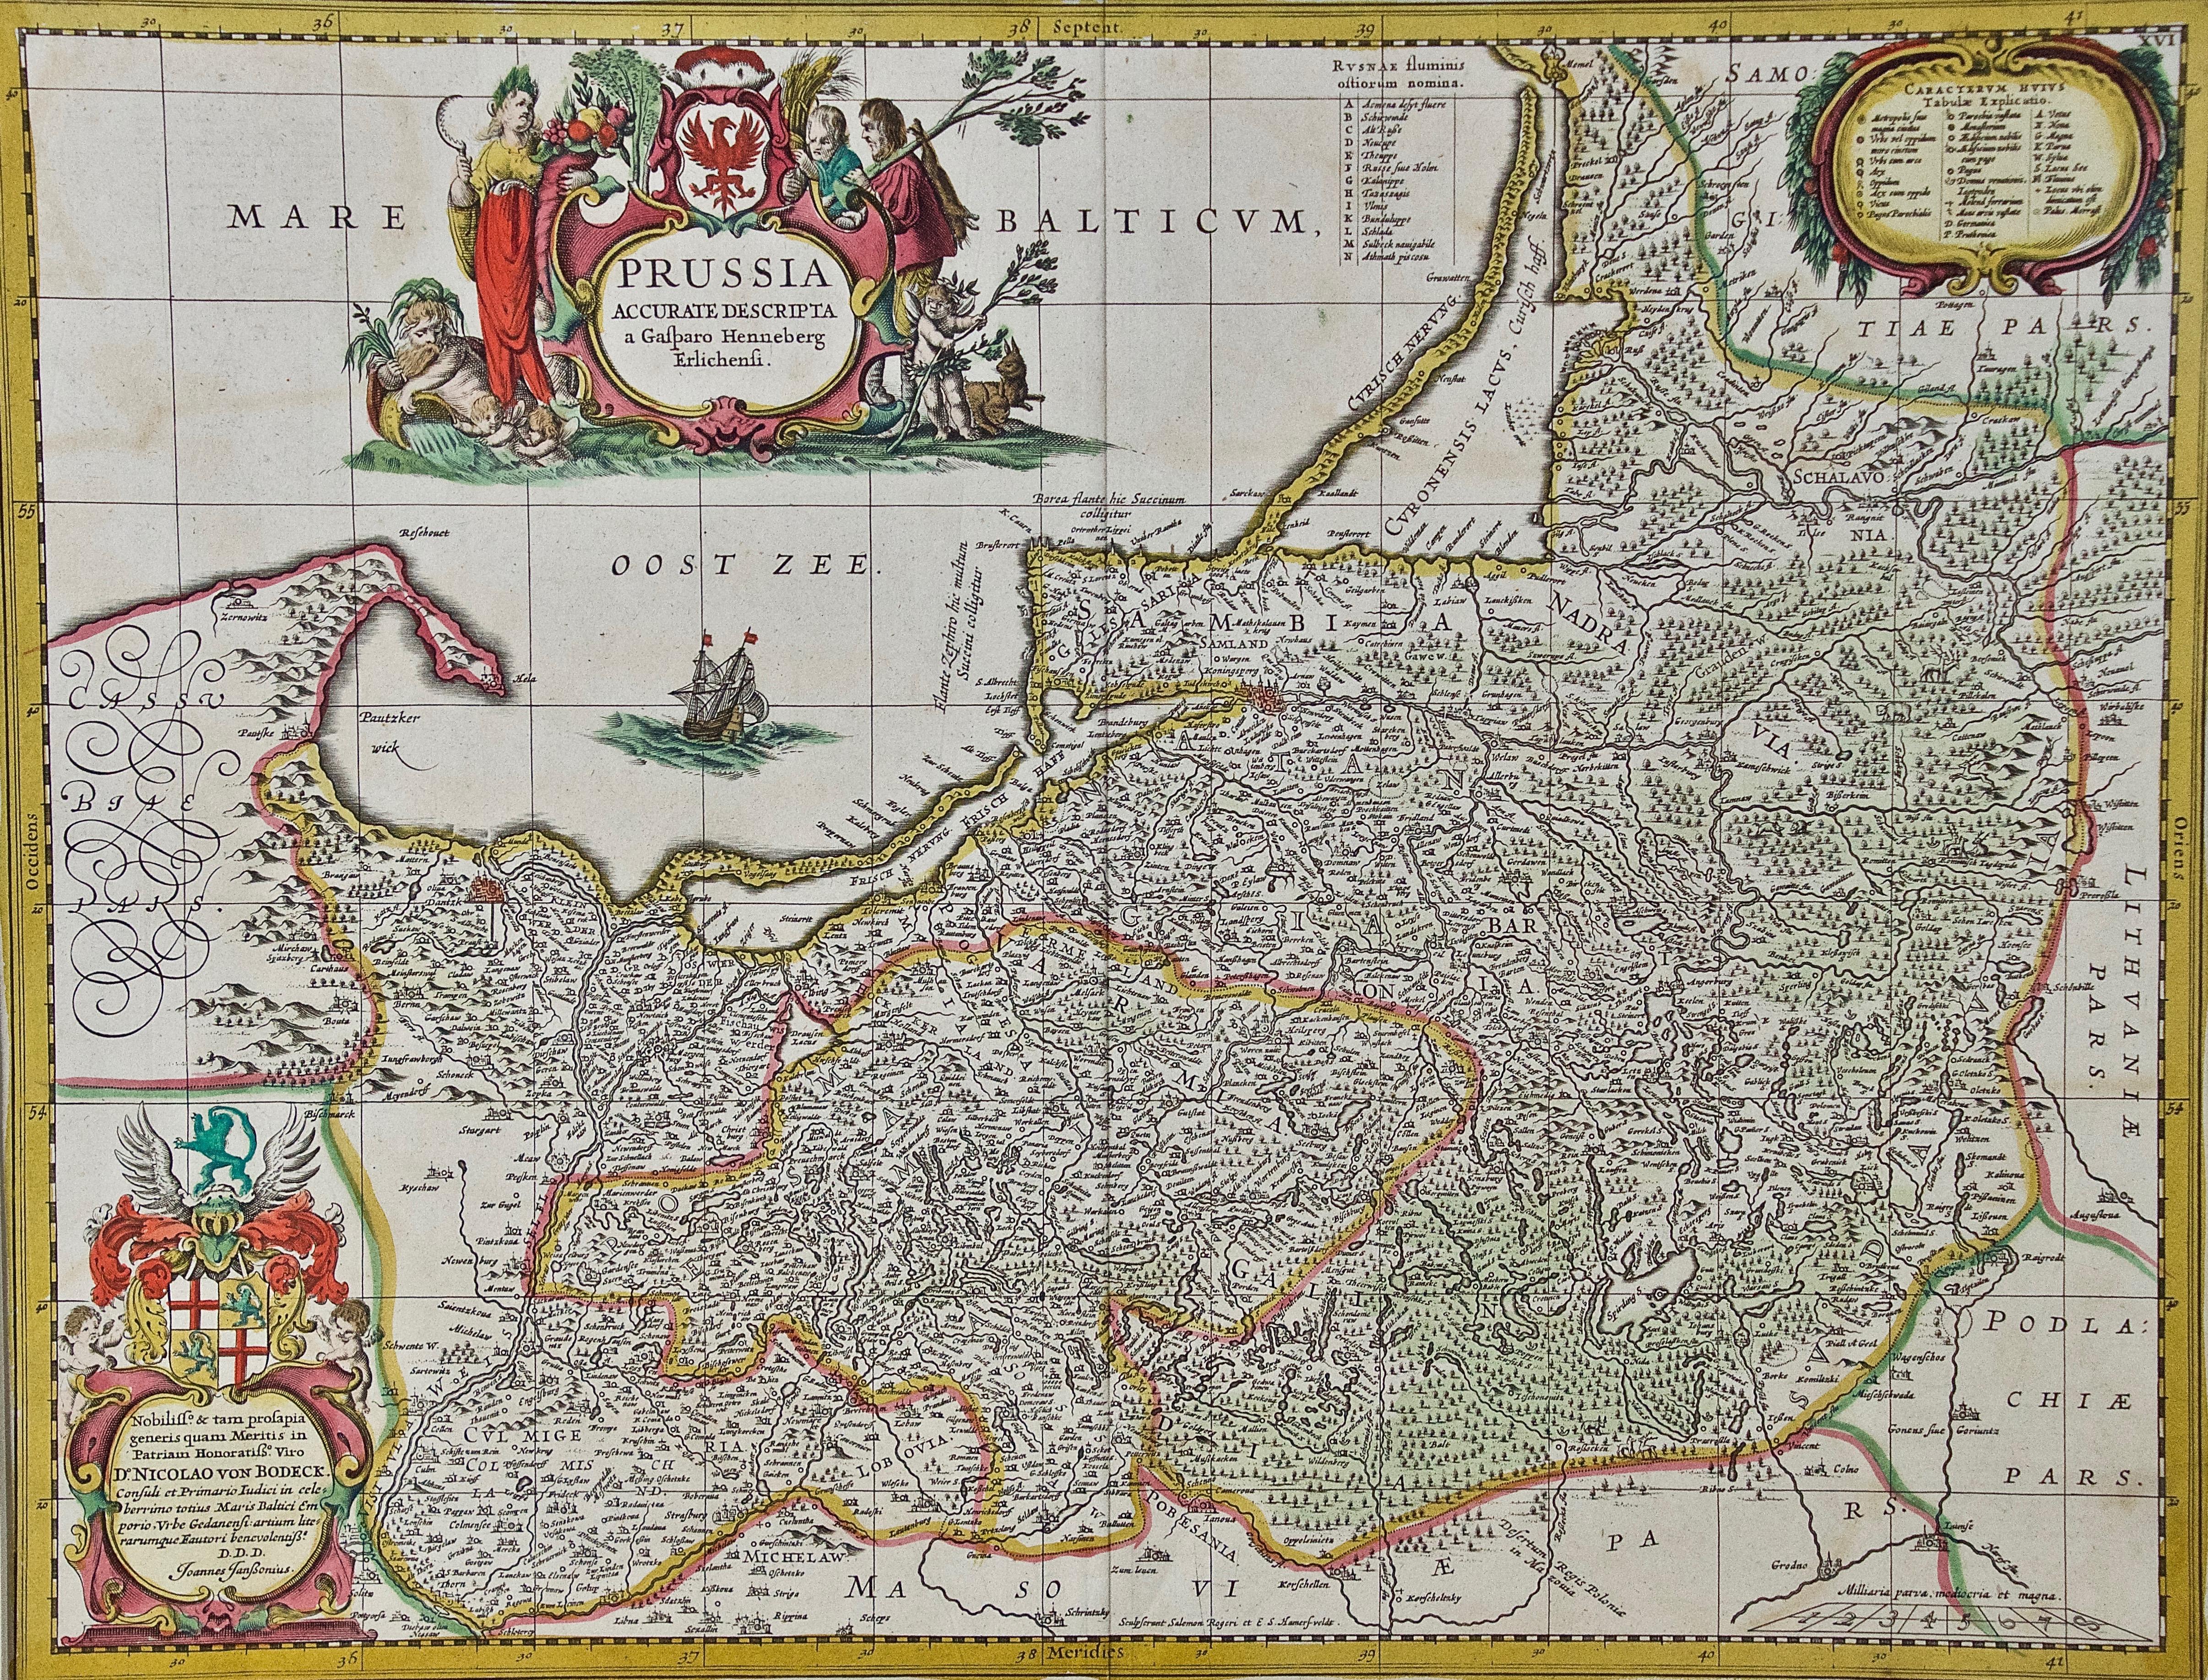 This is an attractive hand-colored copperplate engraved 17th century map of Prussia entitled 